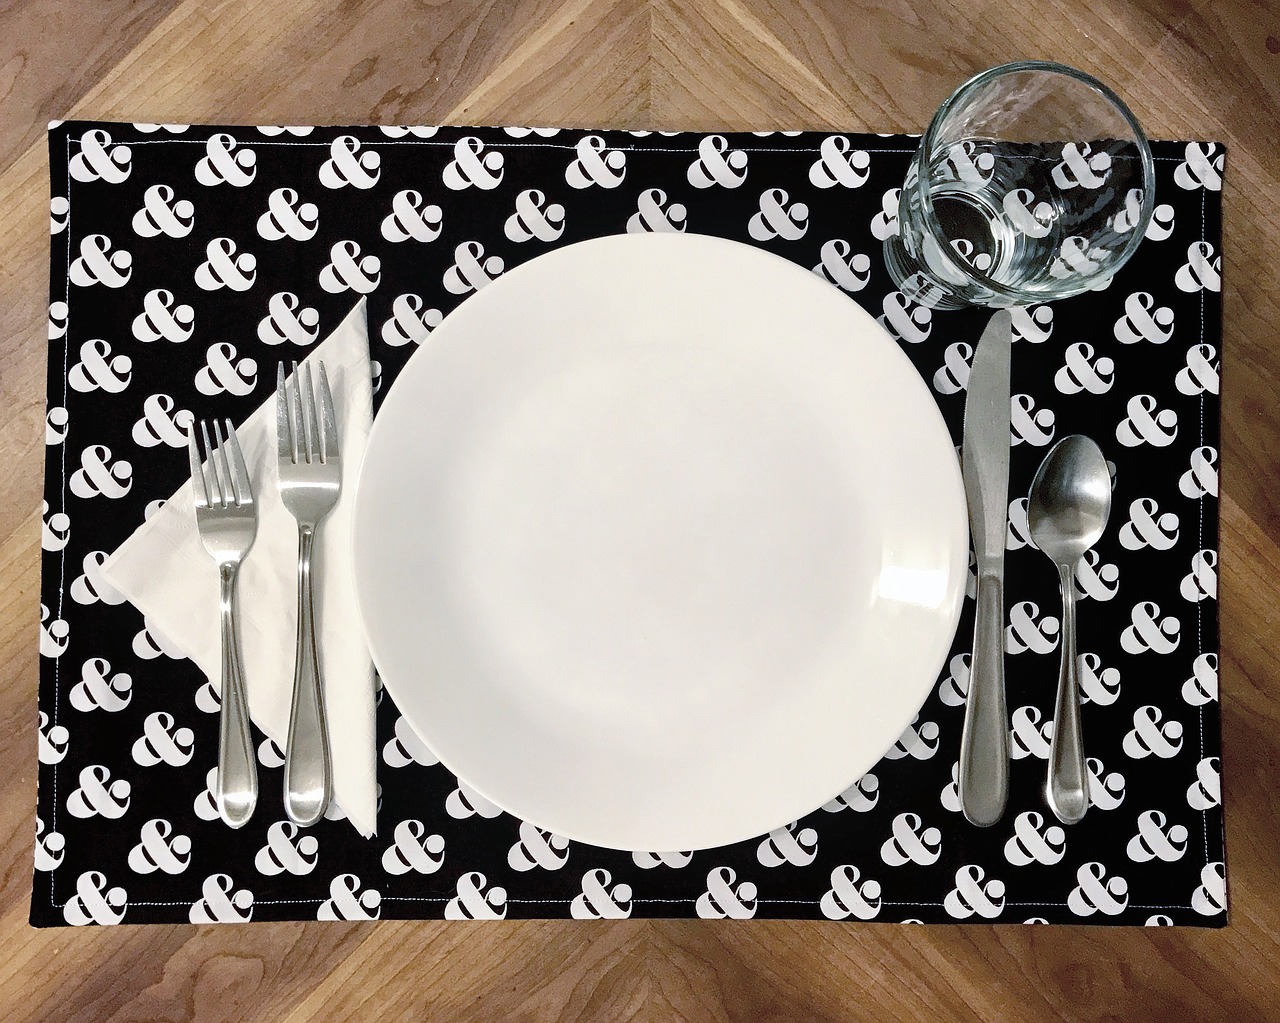 placemat plate place free photo